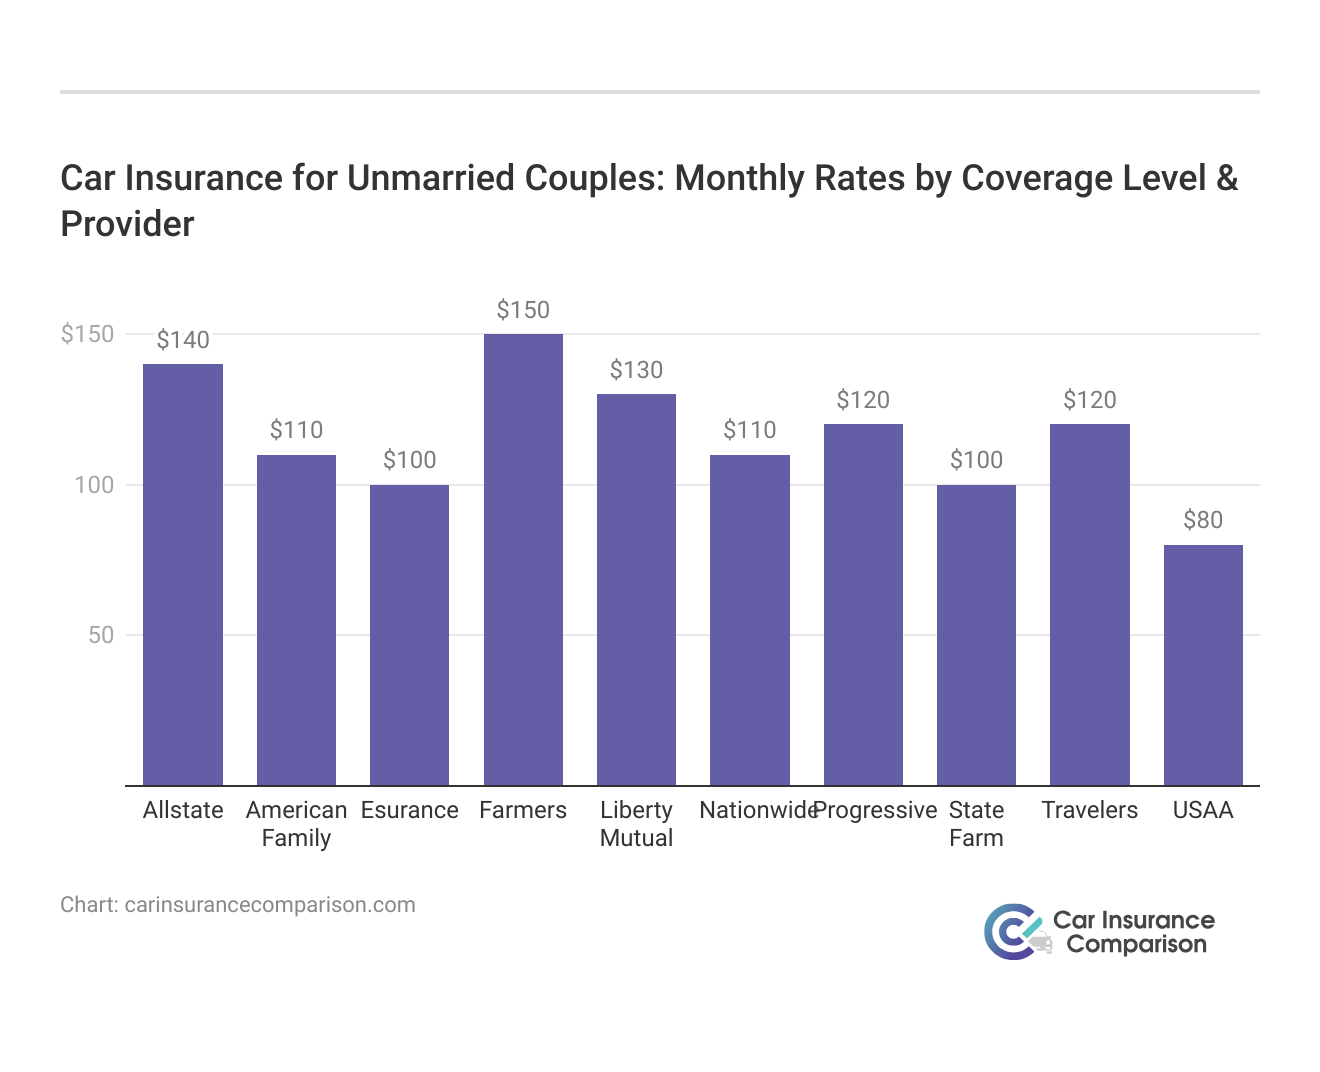 <h3>Car Insurance for Unmarried Couples: Monthly Rates by Coverage Level & Provider</h3>